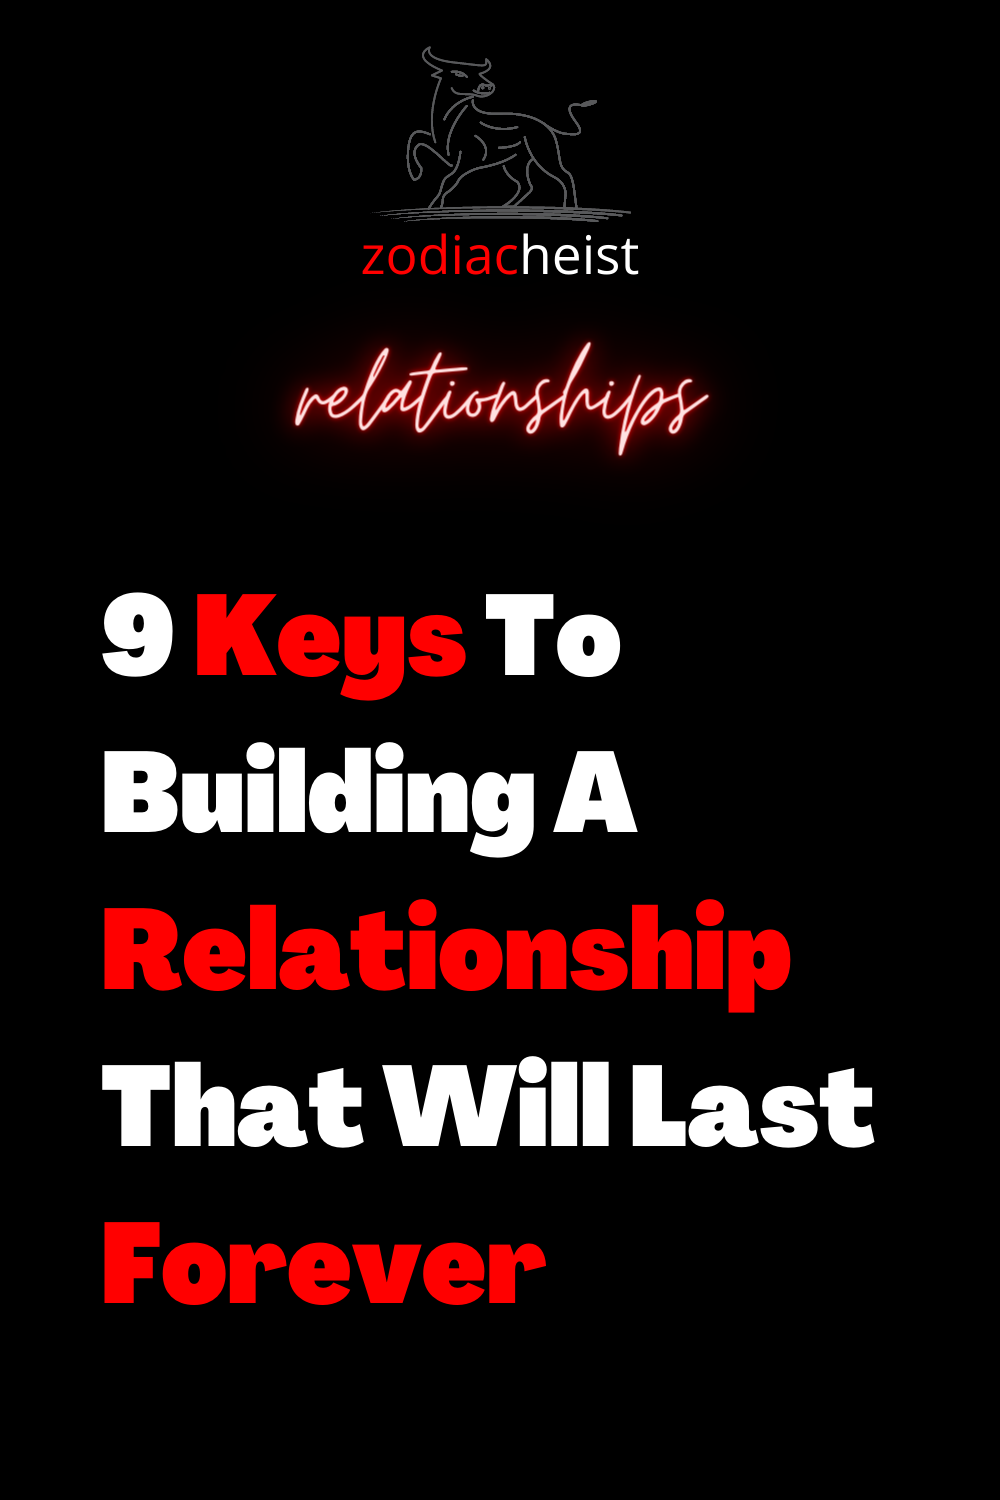 9 Keys To Building A Relationship That Will Last Forever